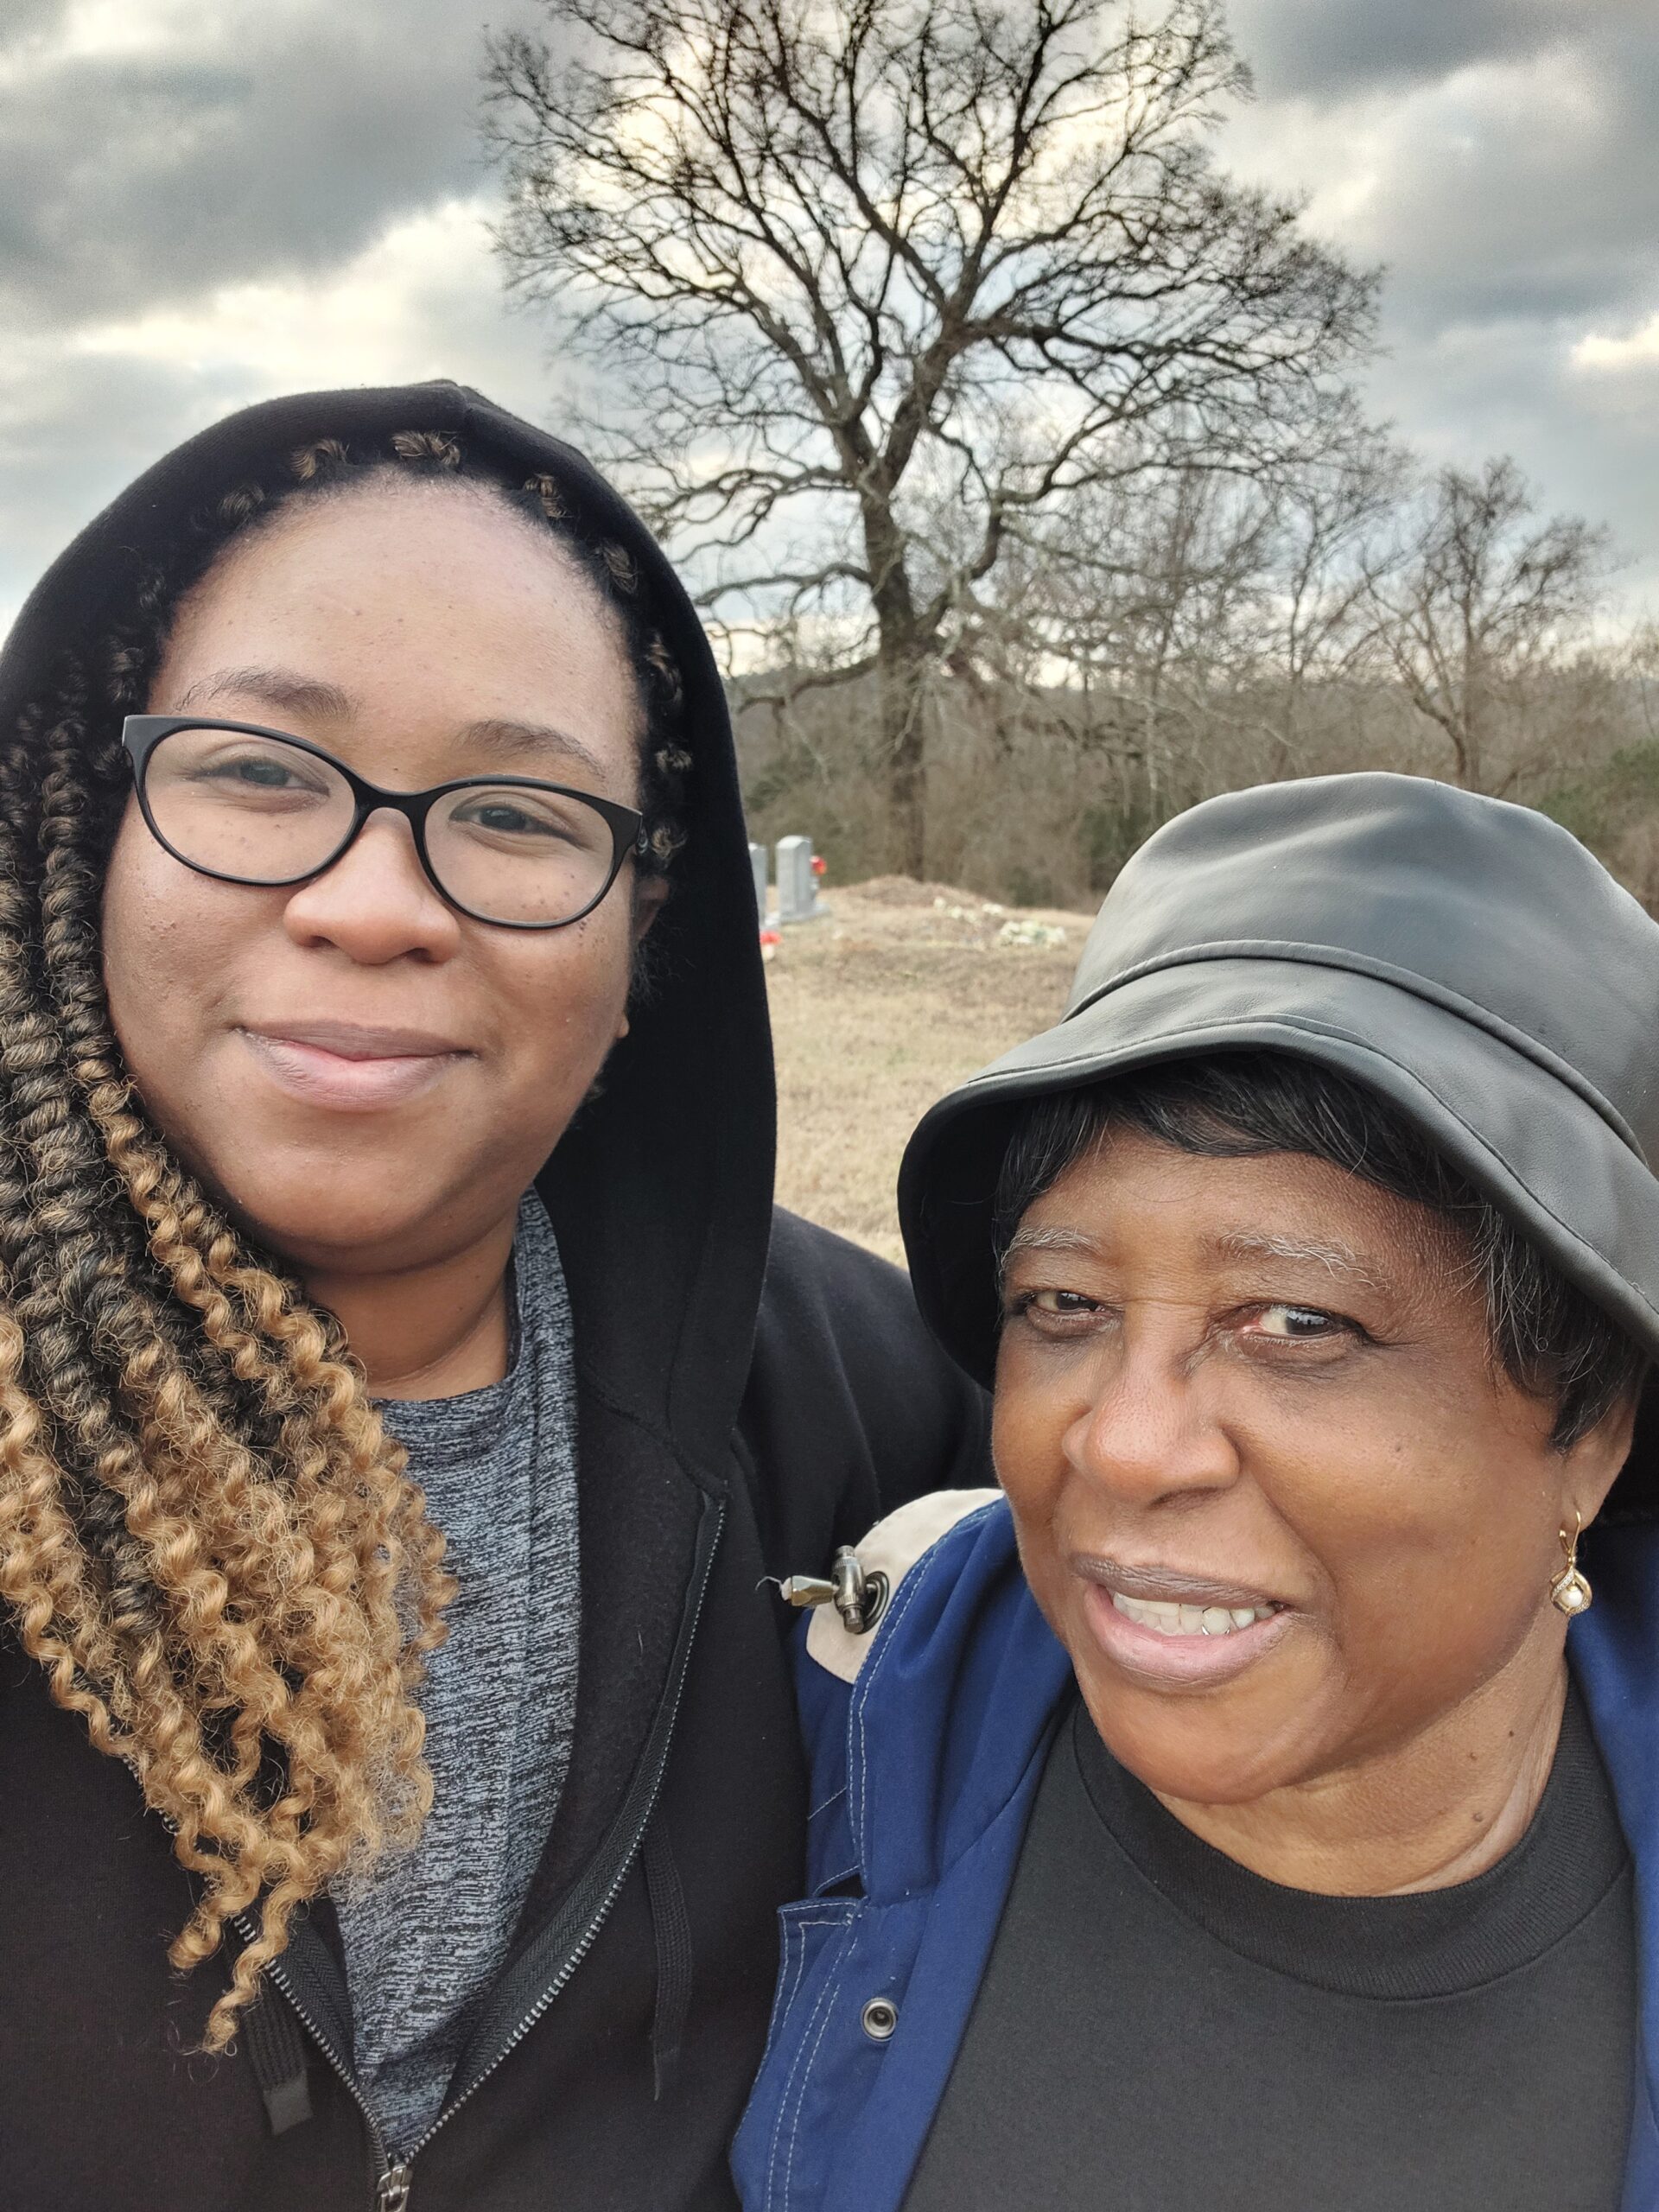 MZMF Field Secretary Emily Hilliard & Shiloh MB Church member Verdie Cathey at the installation on January 8, 2023 (Photo © Emily Hilliard 2023)